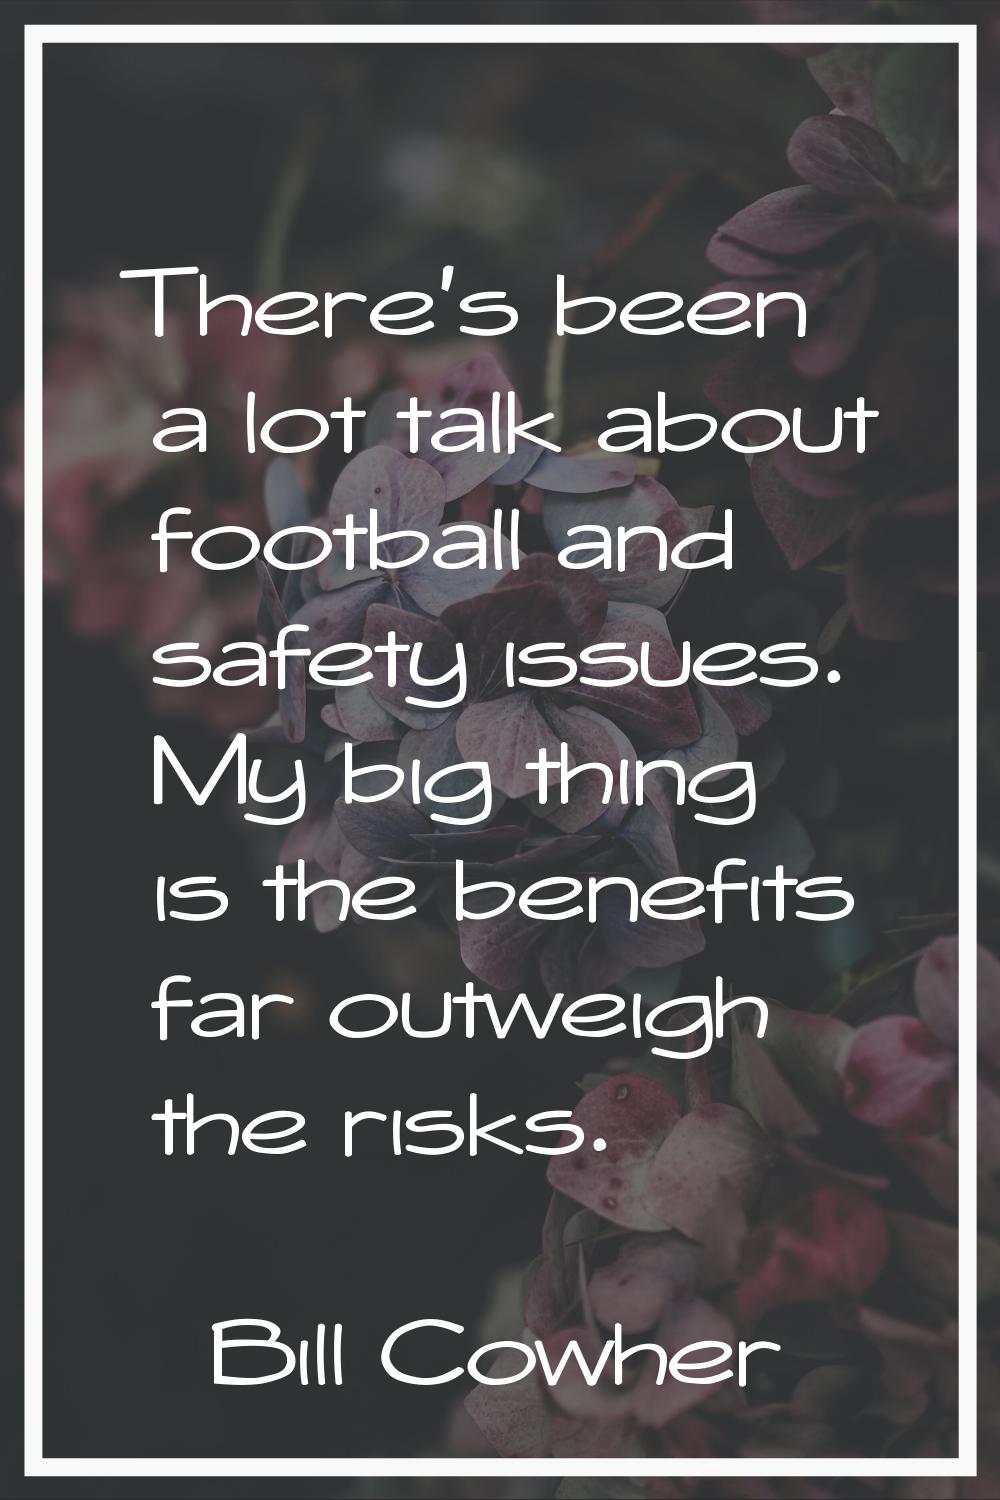 There's been a lot talk about football and safety issues. My big thing is the benefits far outweigh